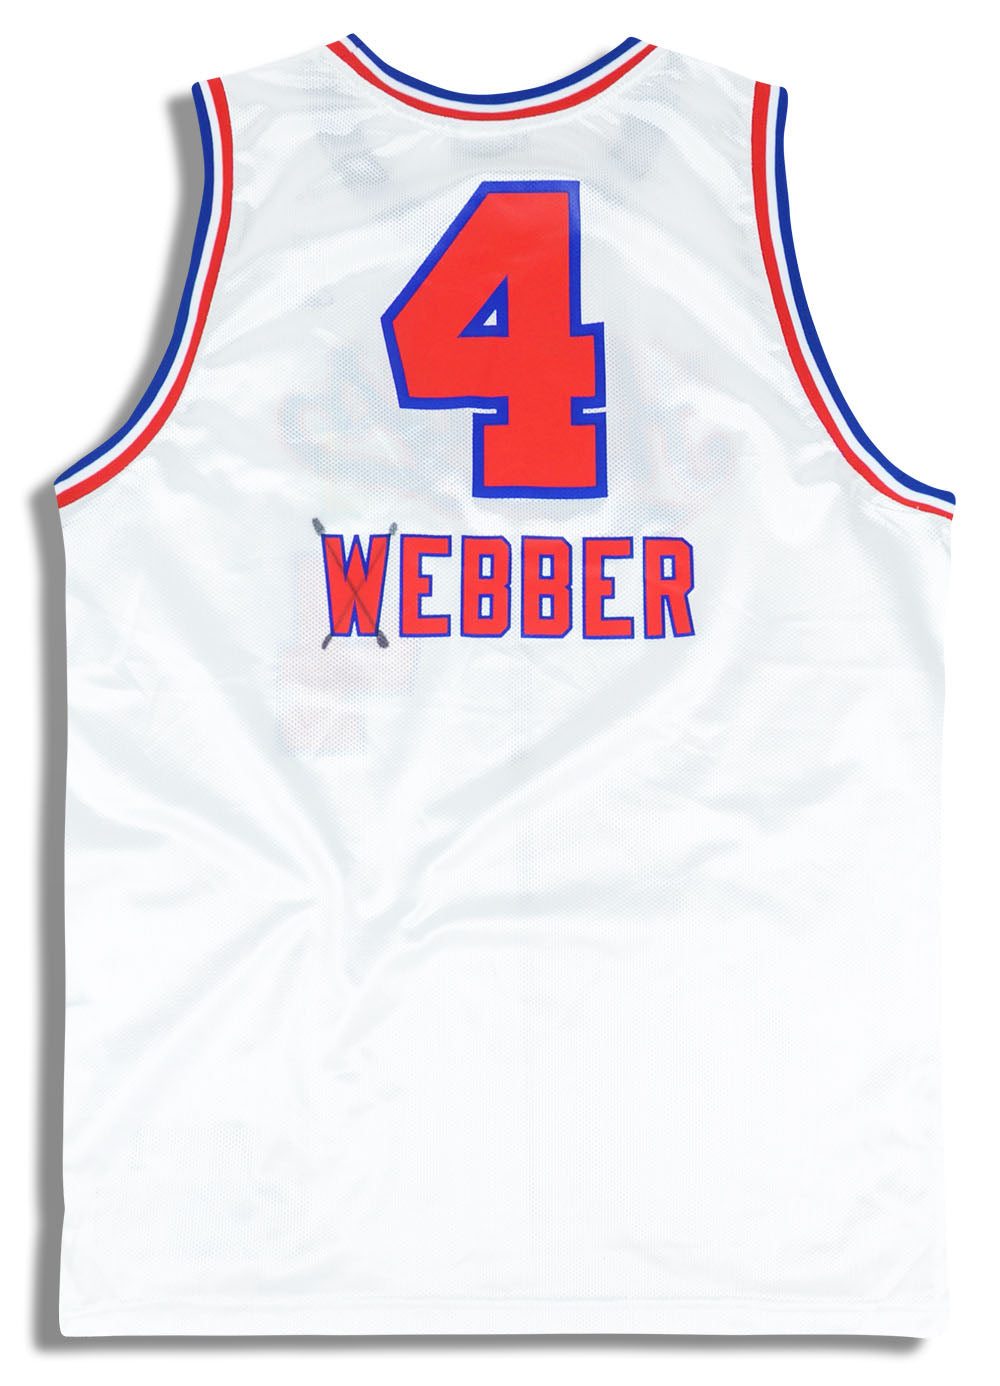 Chris Weber 4 West All Star Nike Vintage Jersey Size XL White -  Norway